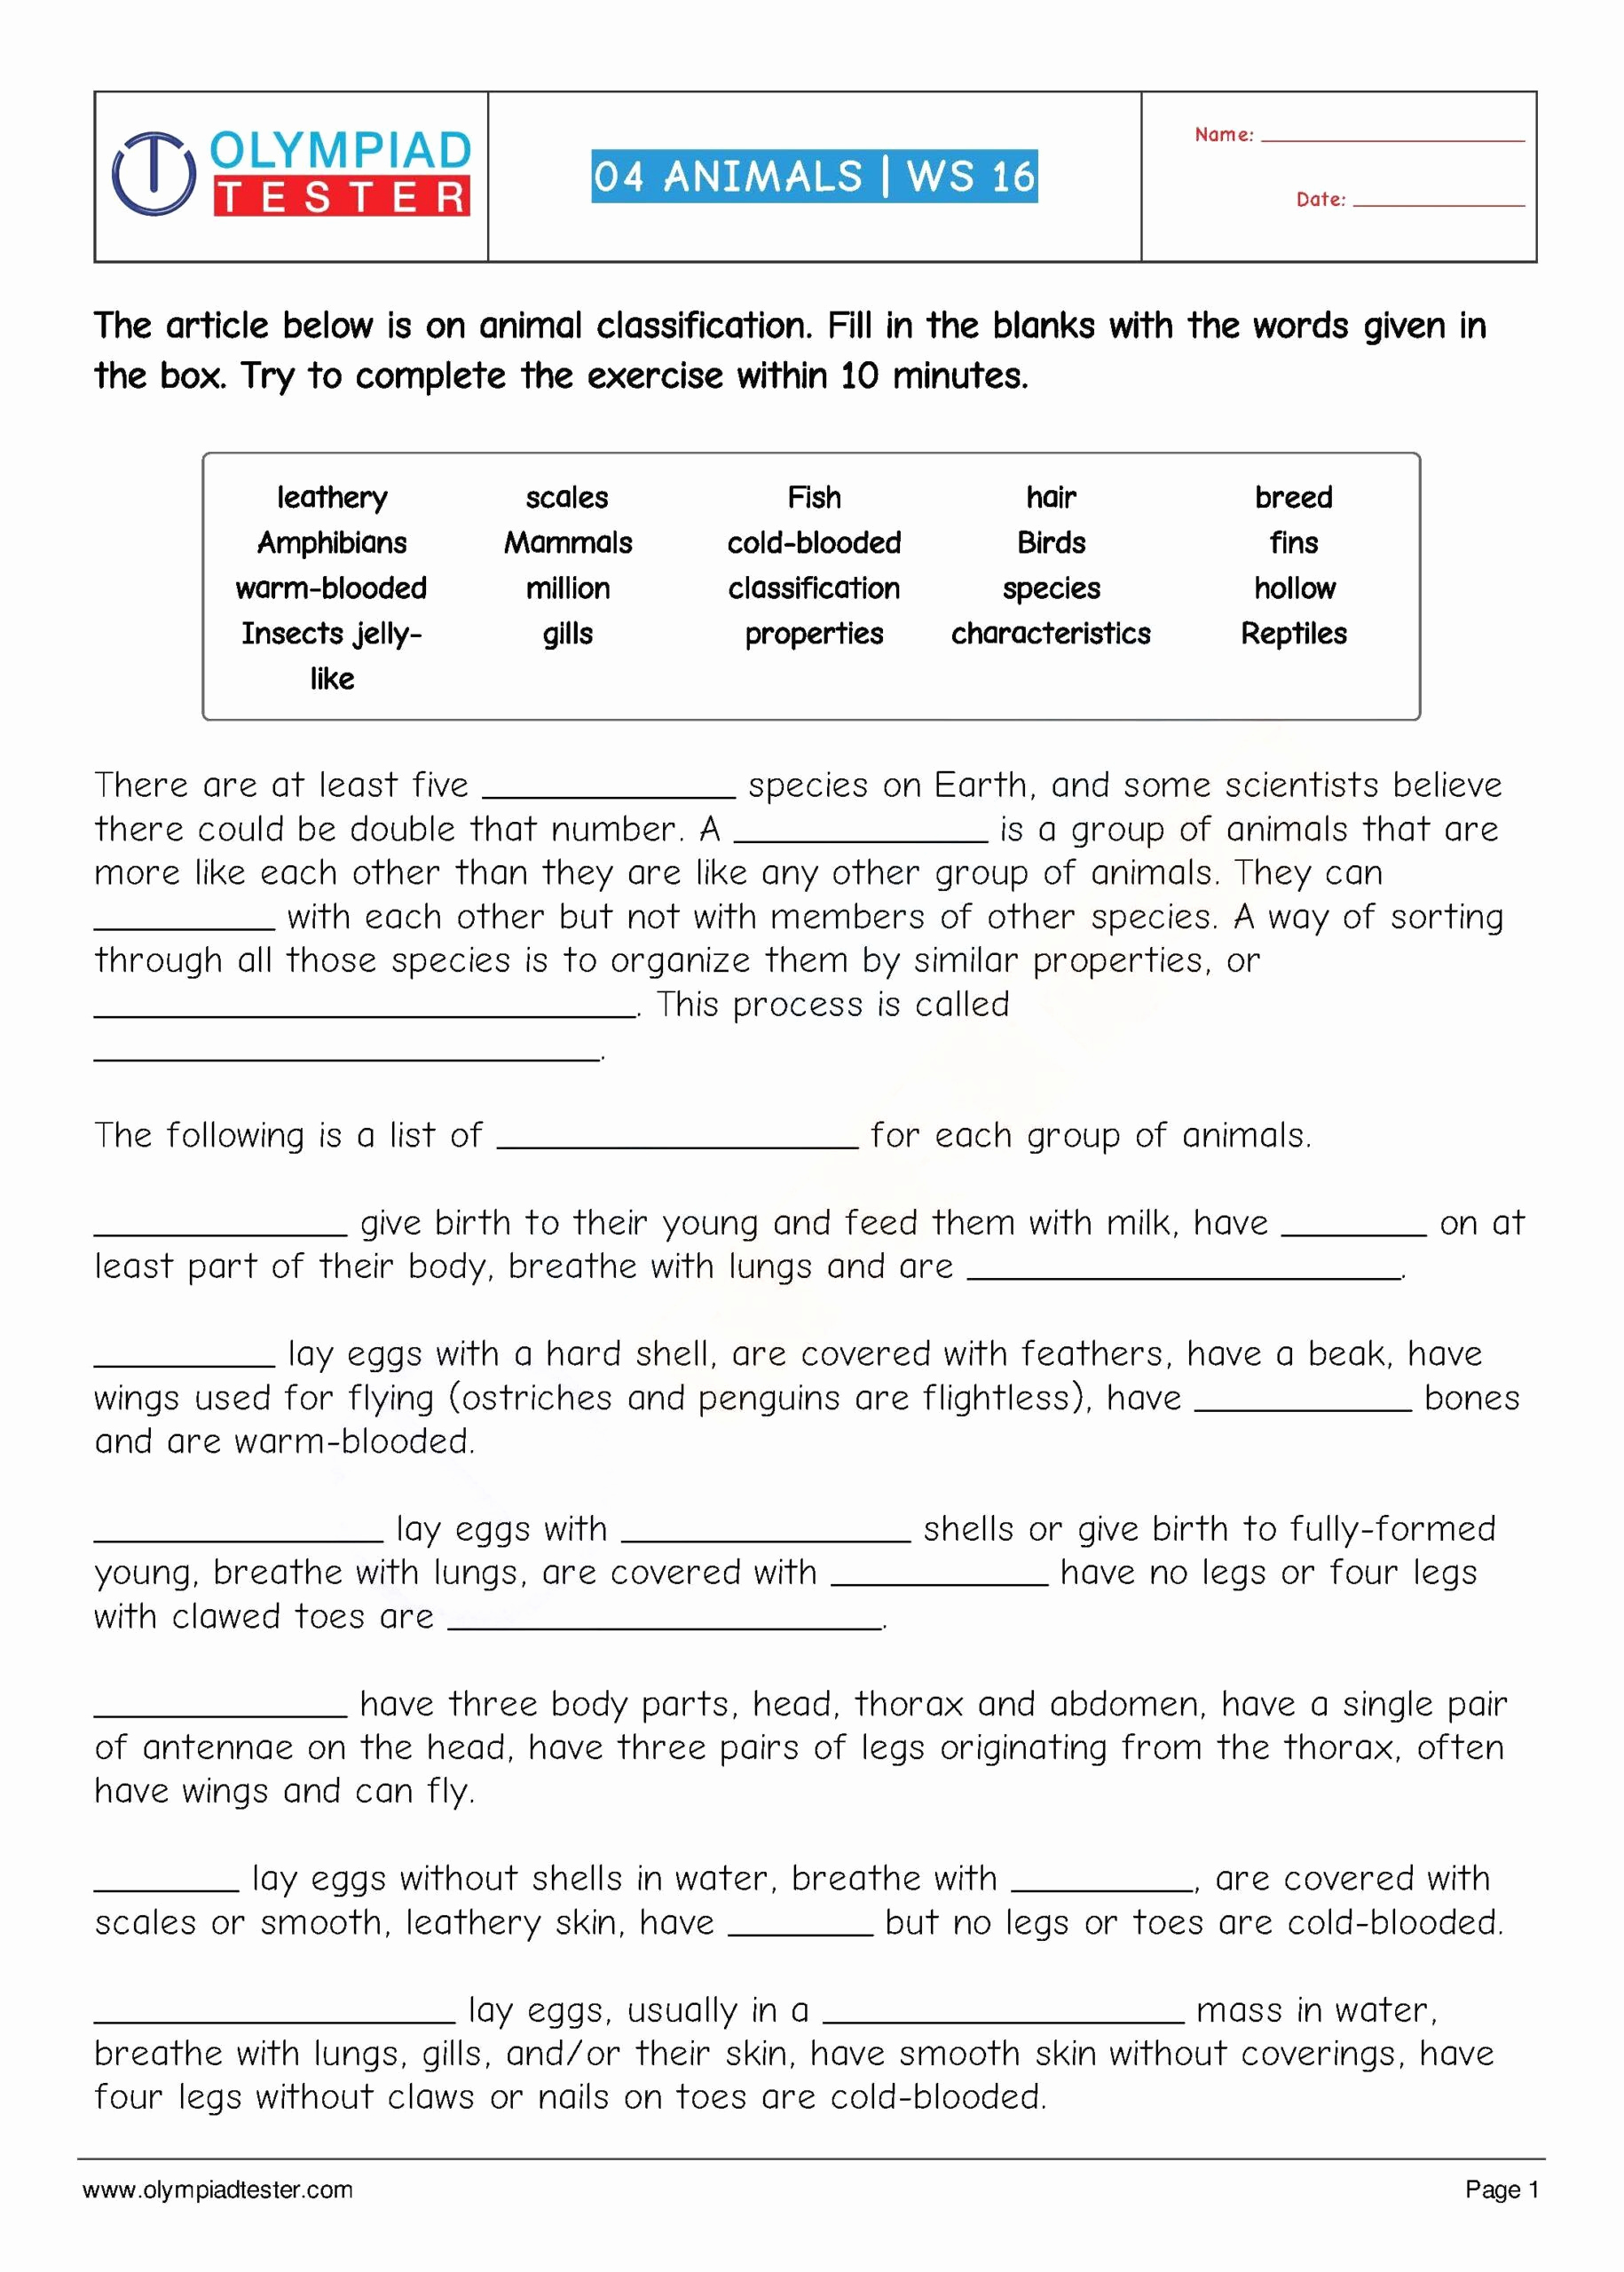 Science Worksheets for 7th Grade Lovely 7th Grade Science Worksheets Pdf This Printable Grade